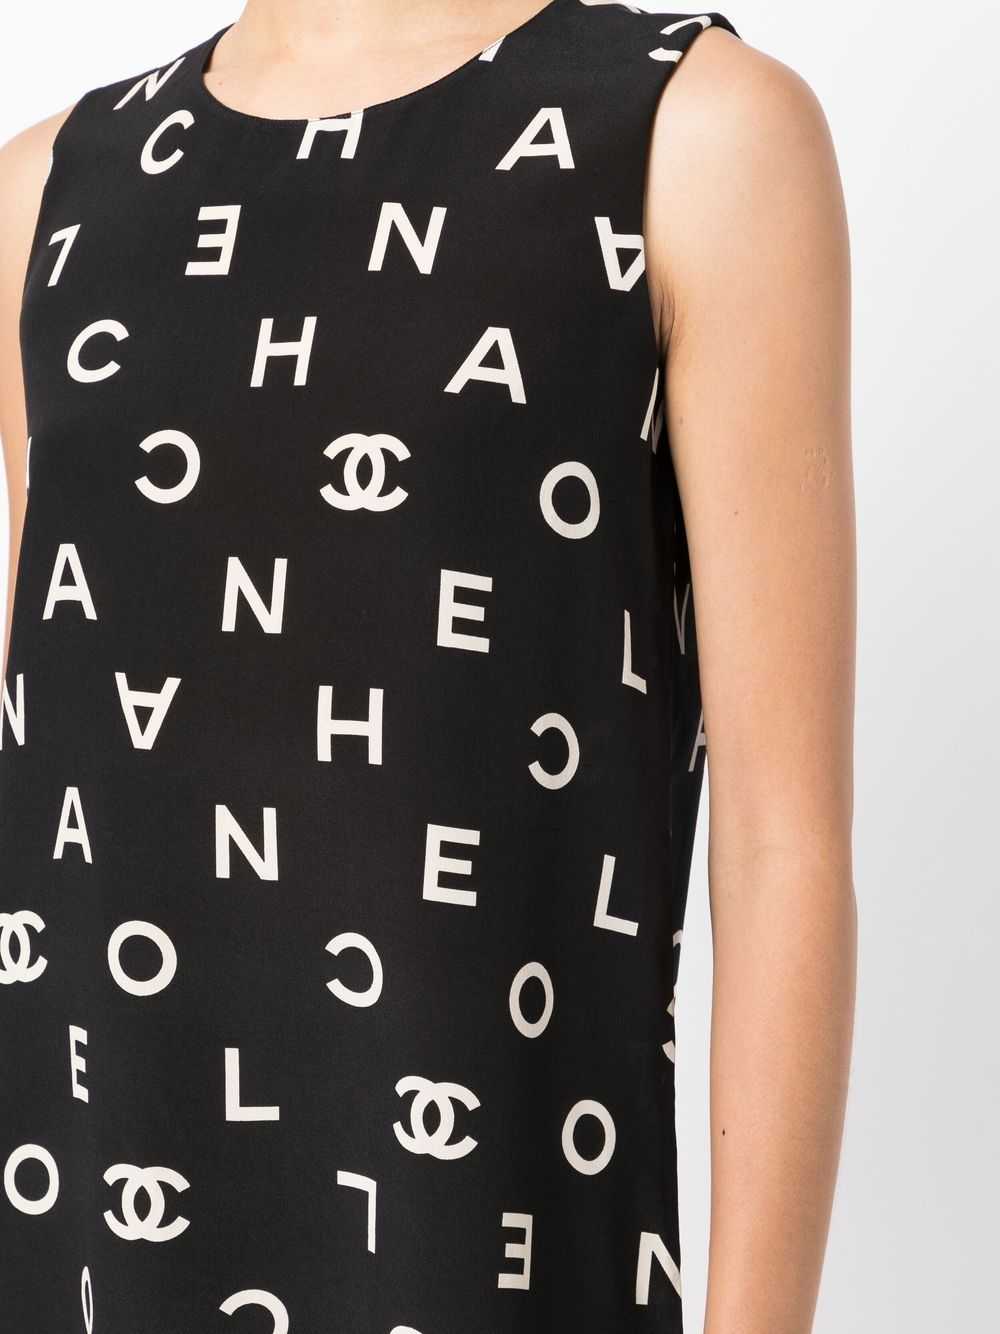 CHANEL Pre-Owned 1997 logo-lettering top - Black - image 5